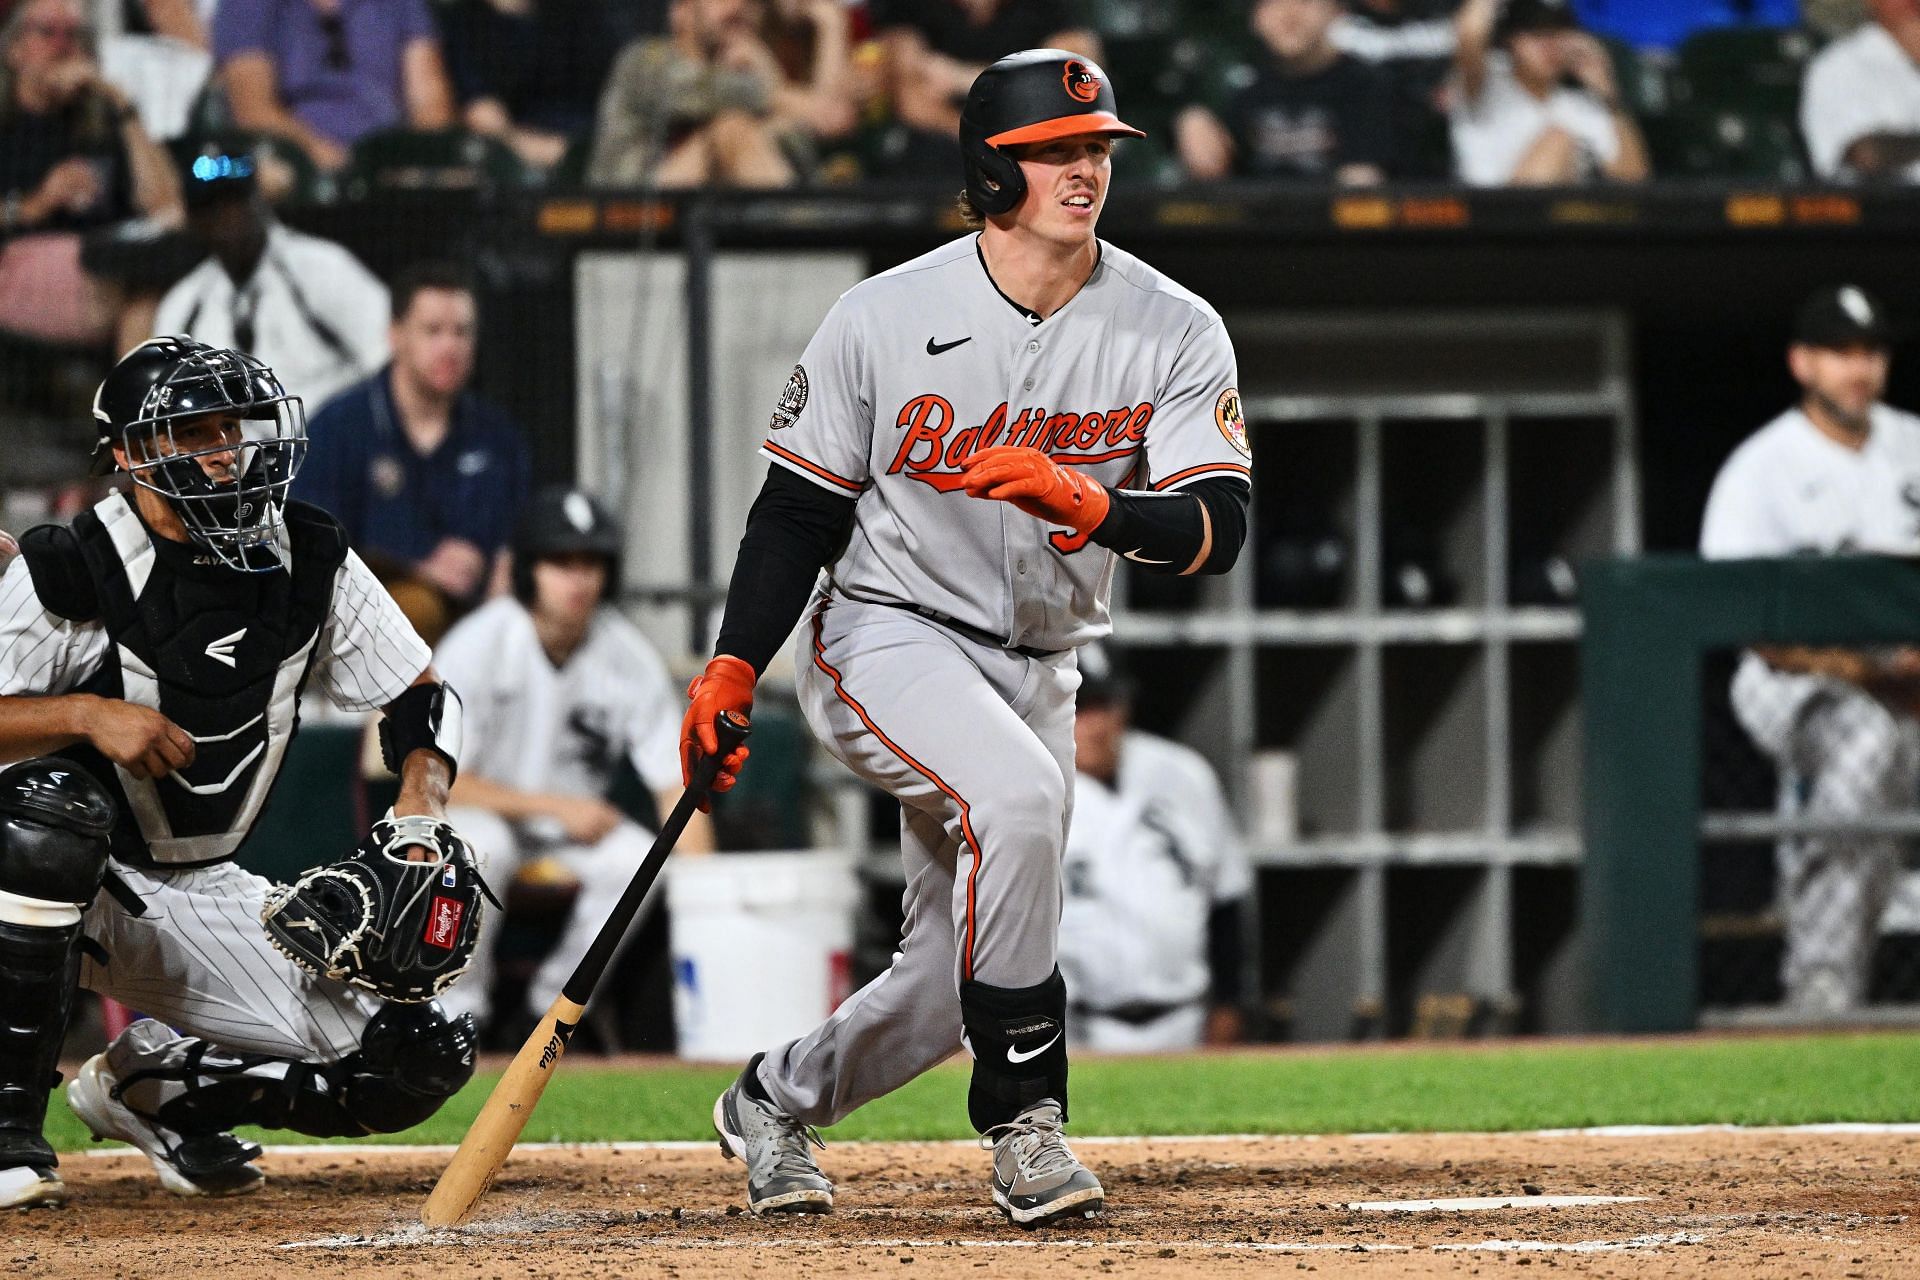 Baltimore Orioles rookie catcher Adley Rutschman hit his fourth home run of the season on Thursday versus the Los Angeles Angels.